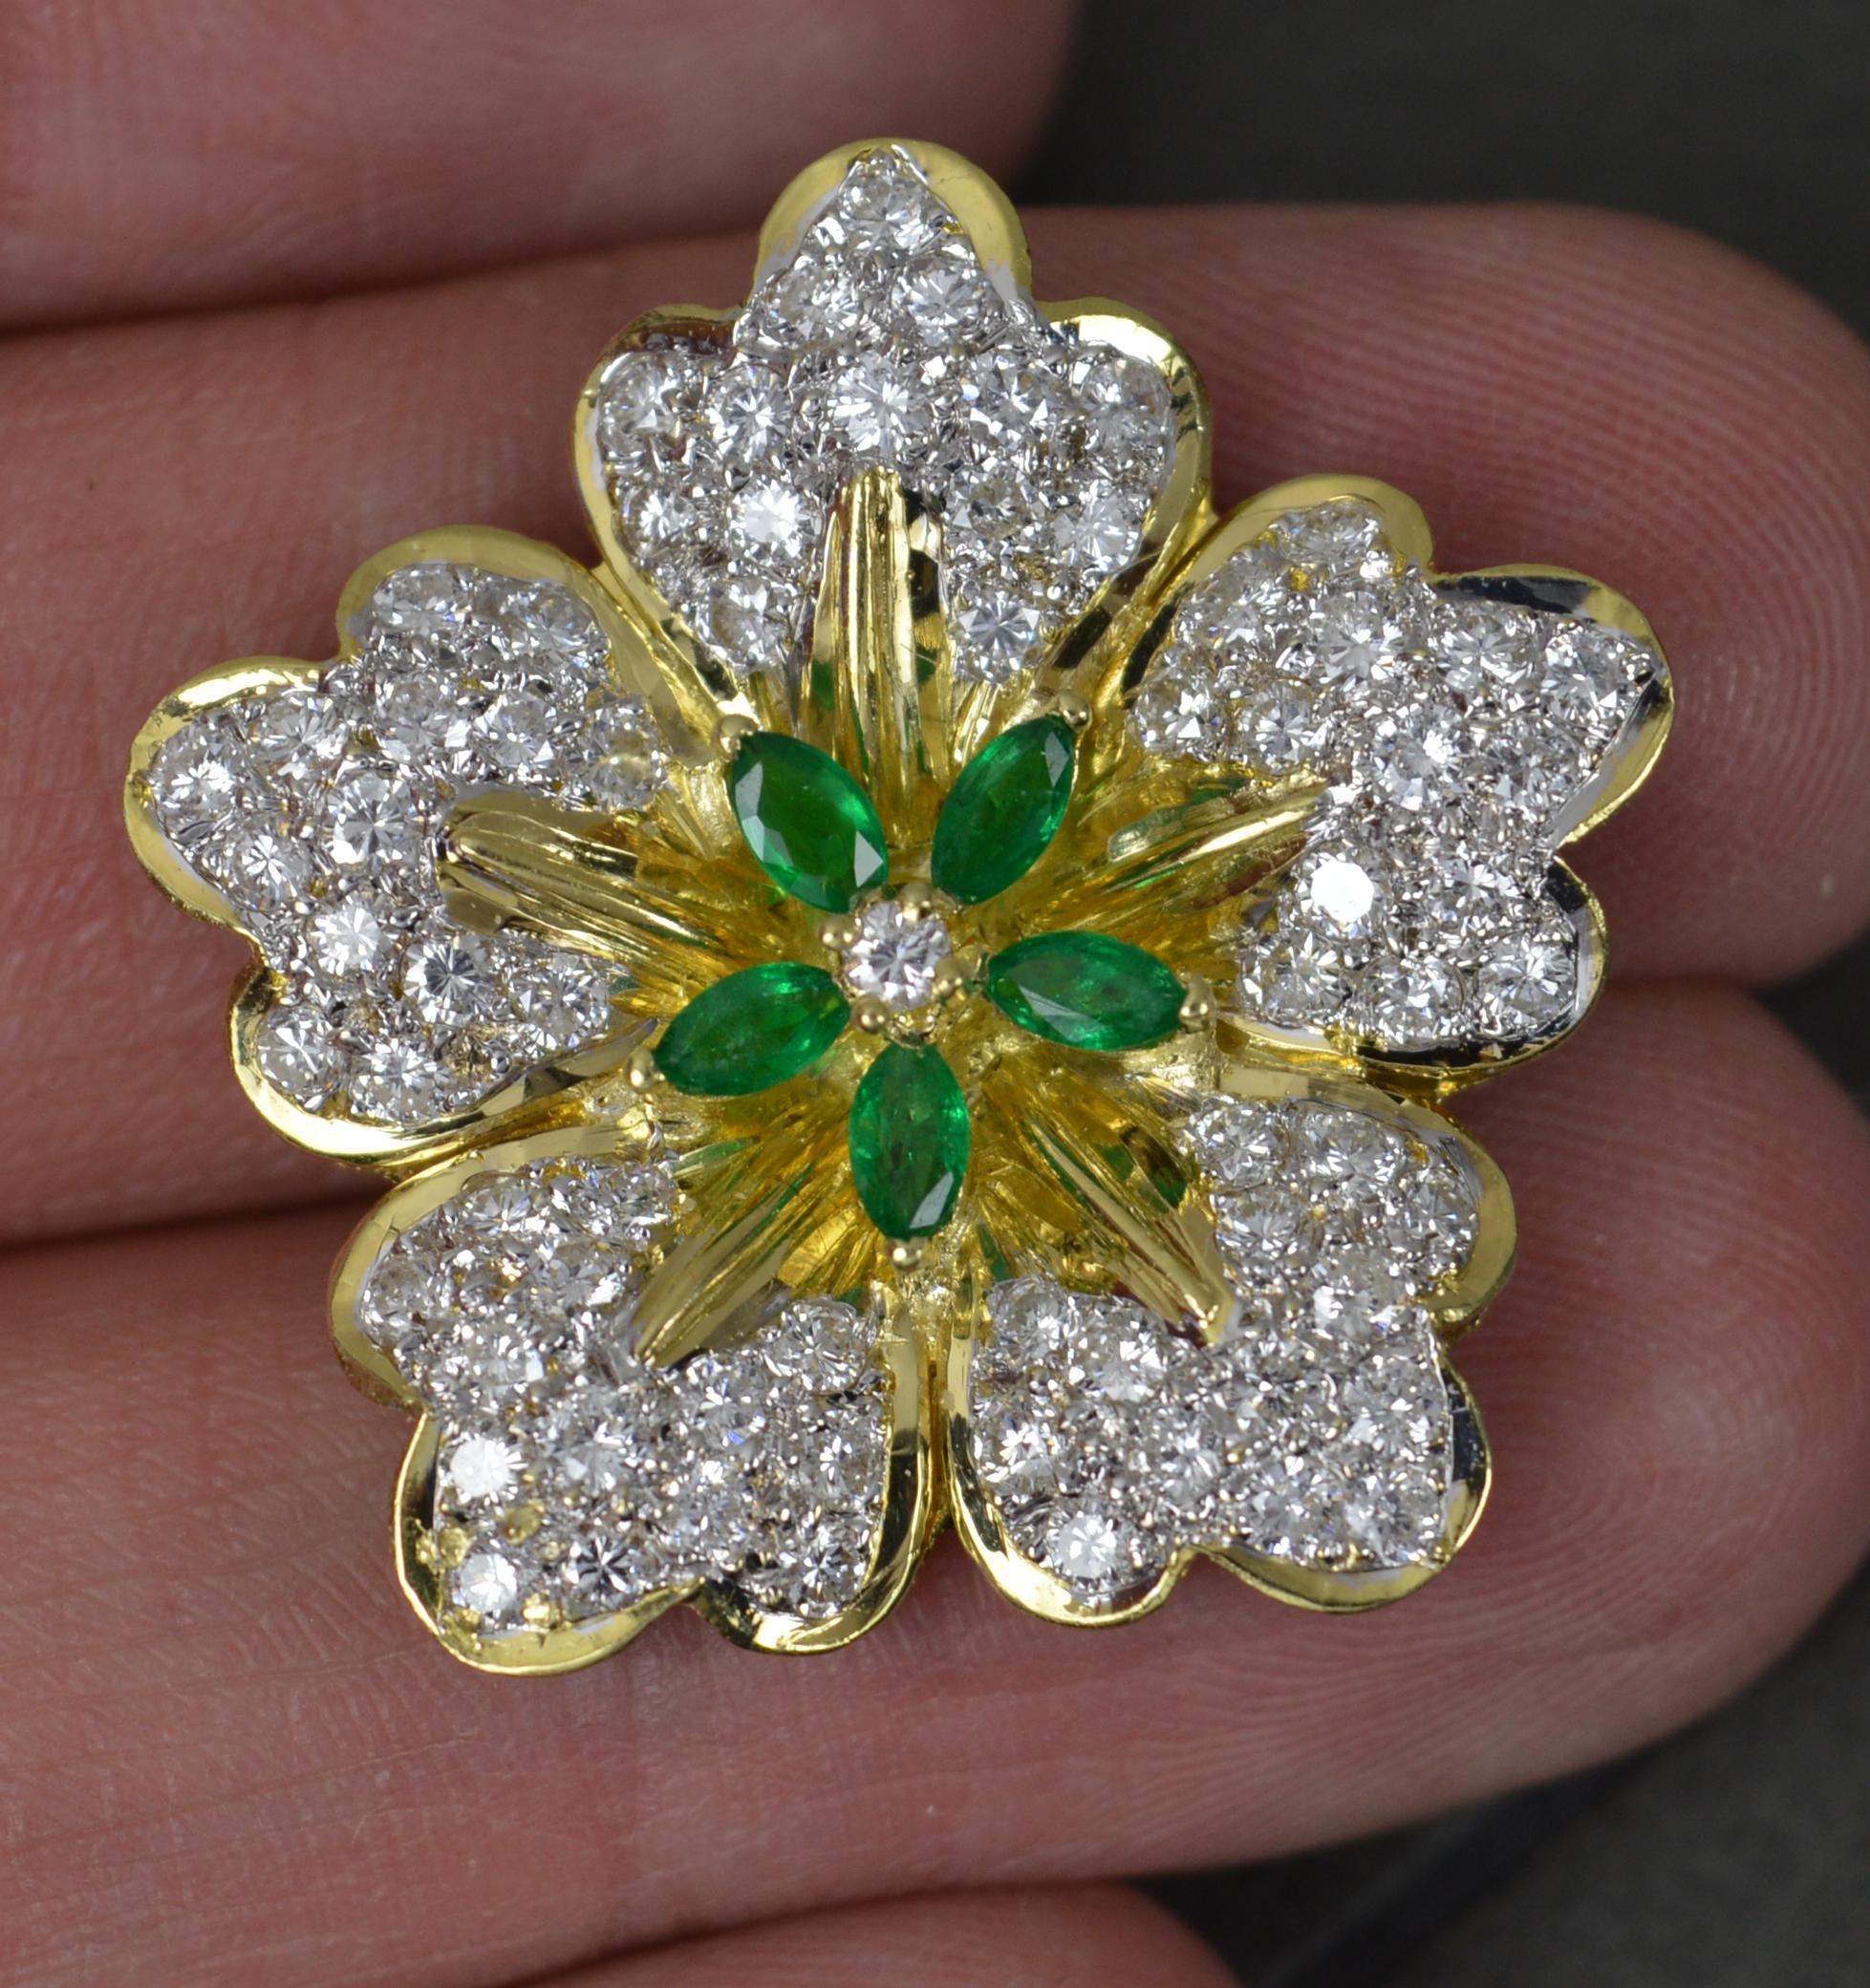 
A superb vintage flower shaped pendant.

Solid 18 carat yellow gold example.

Designed with 70 round brilliant cut diamonds pave set into the five petals and a centre stone with five marquise cut emeralds surrounding. 1.5 carat total diamond